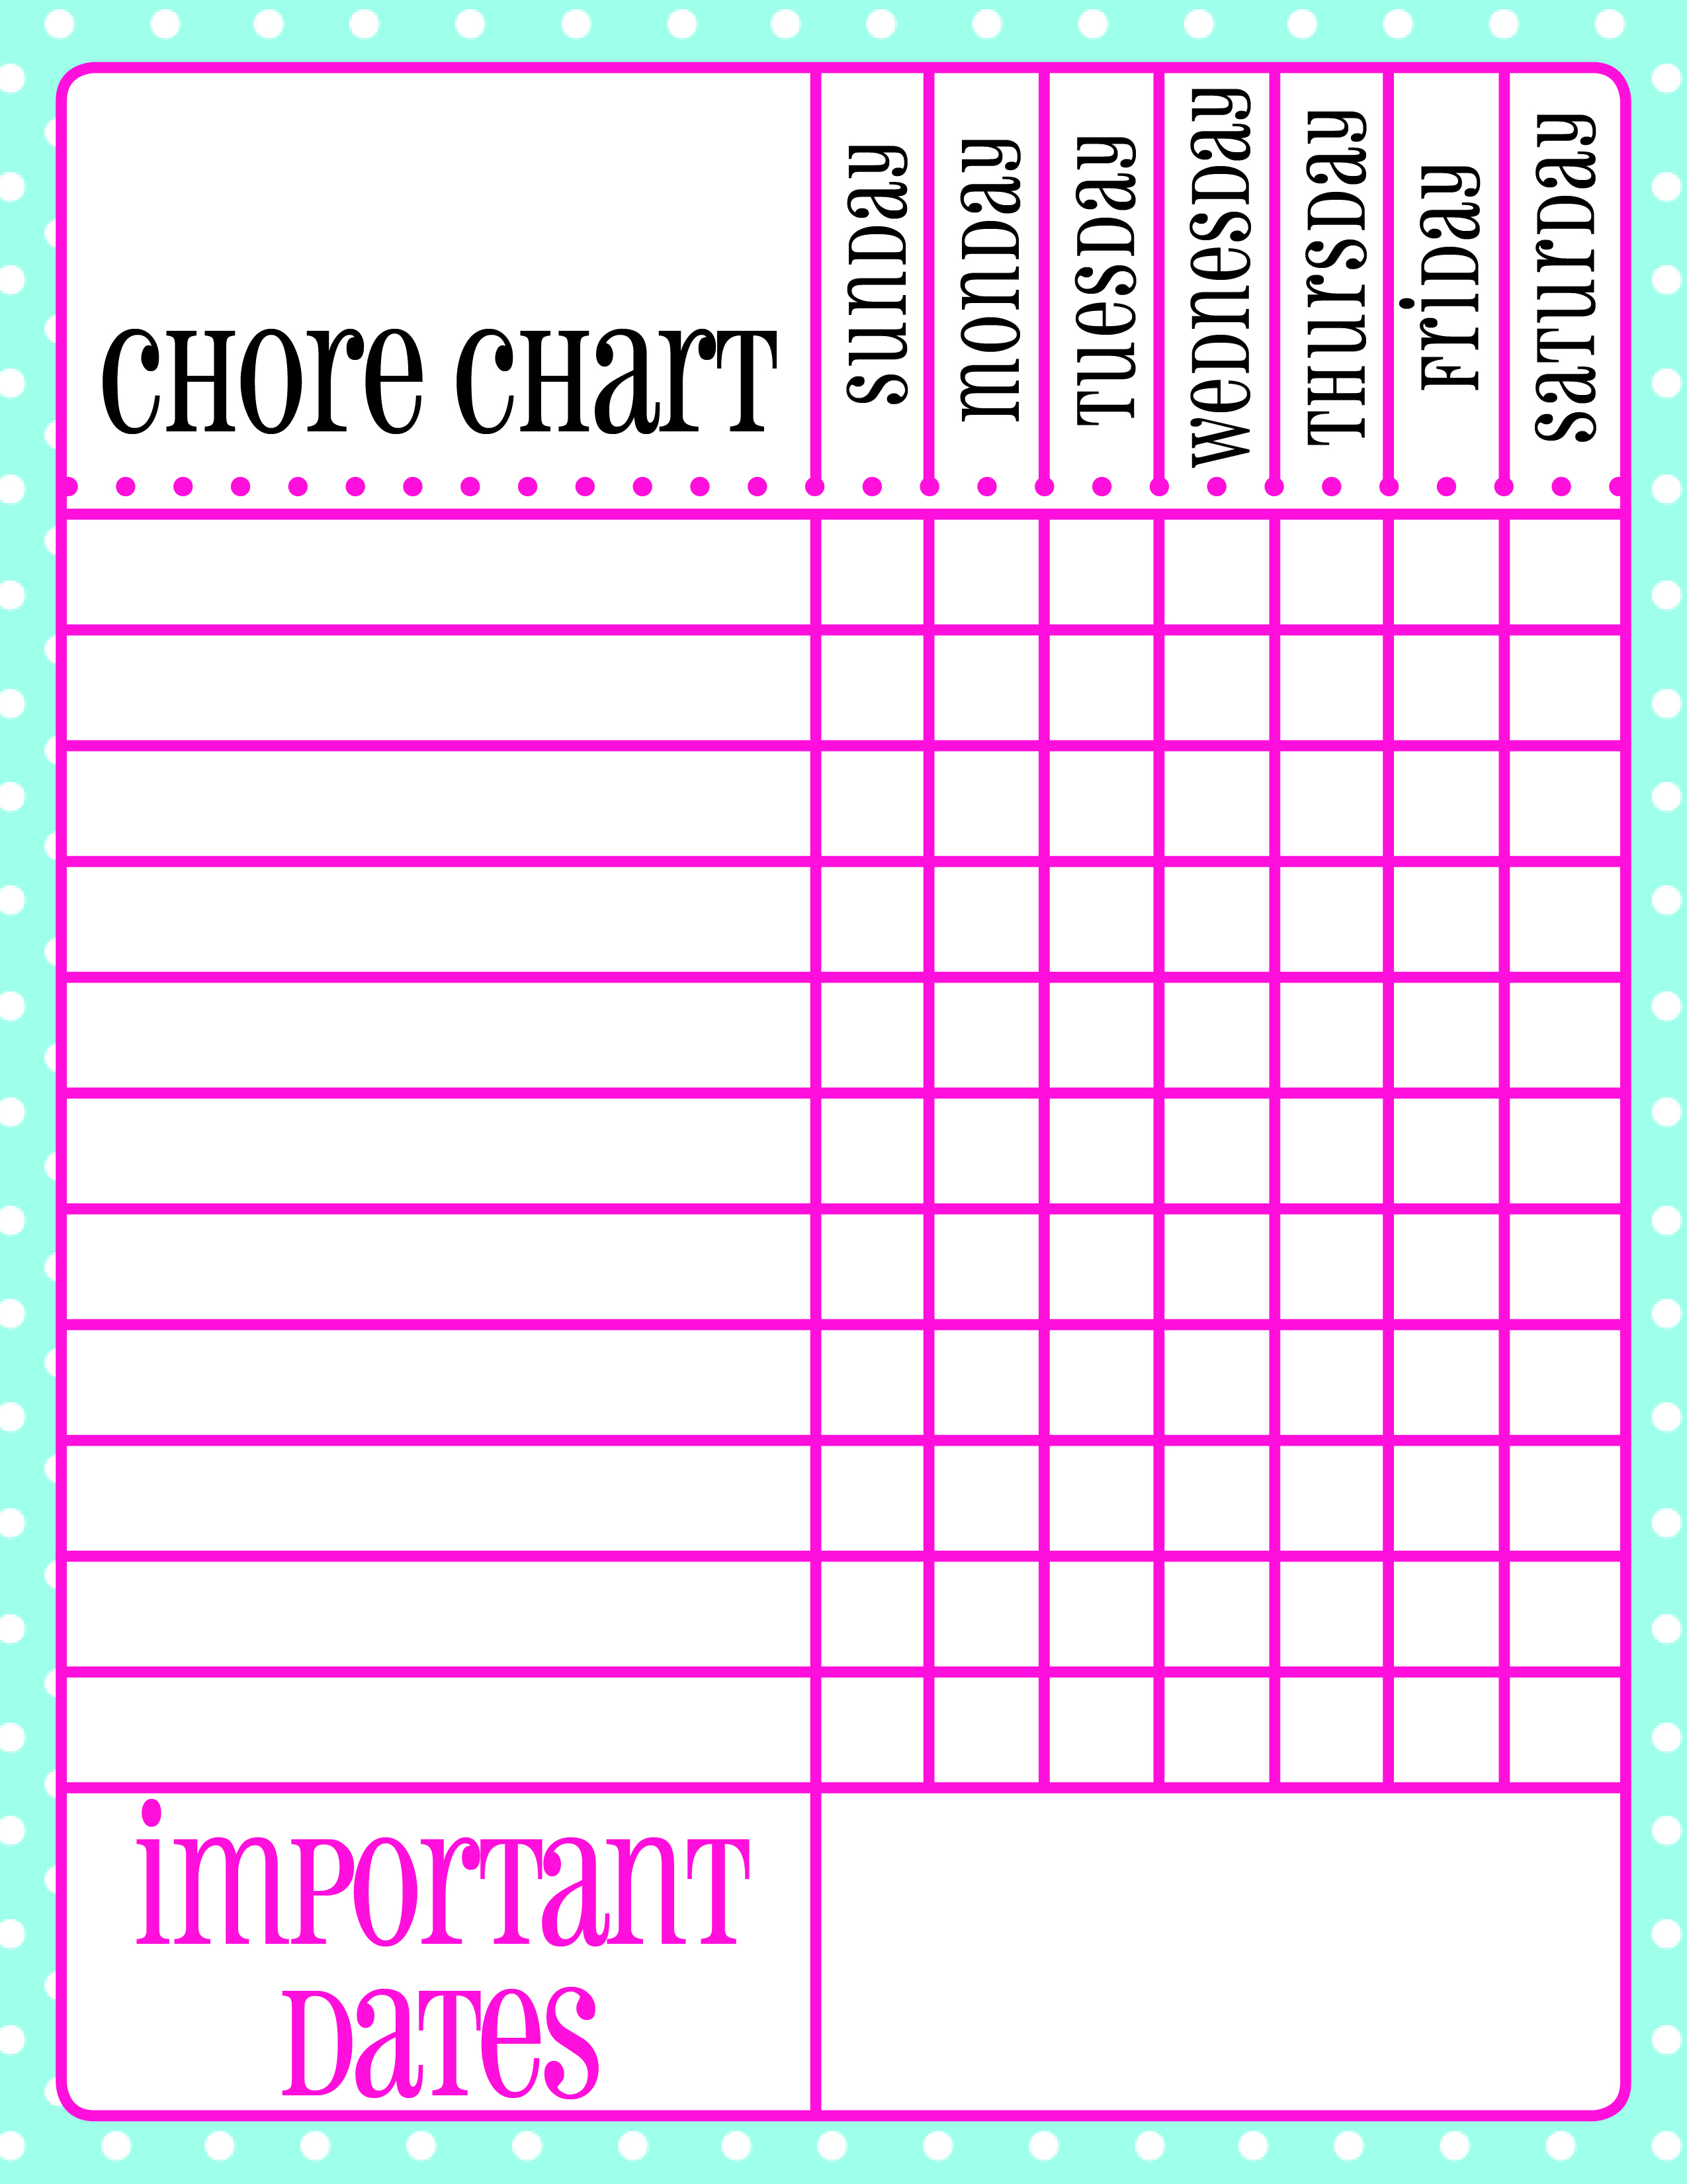 Free chore chart printables. Boy and girl versions that'll look 